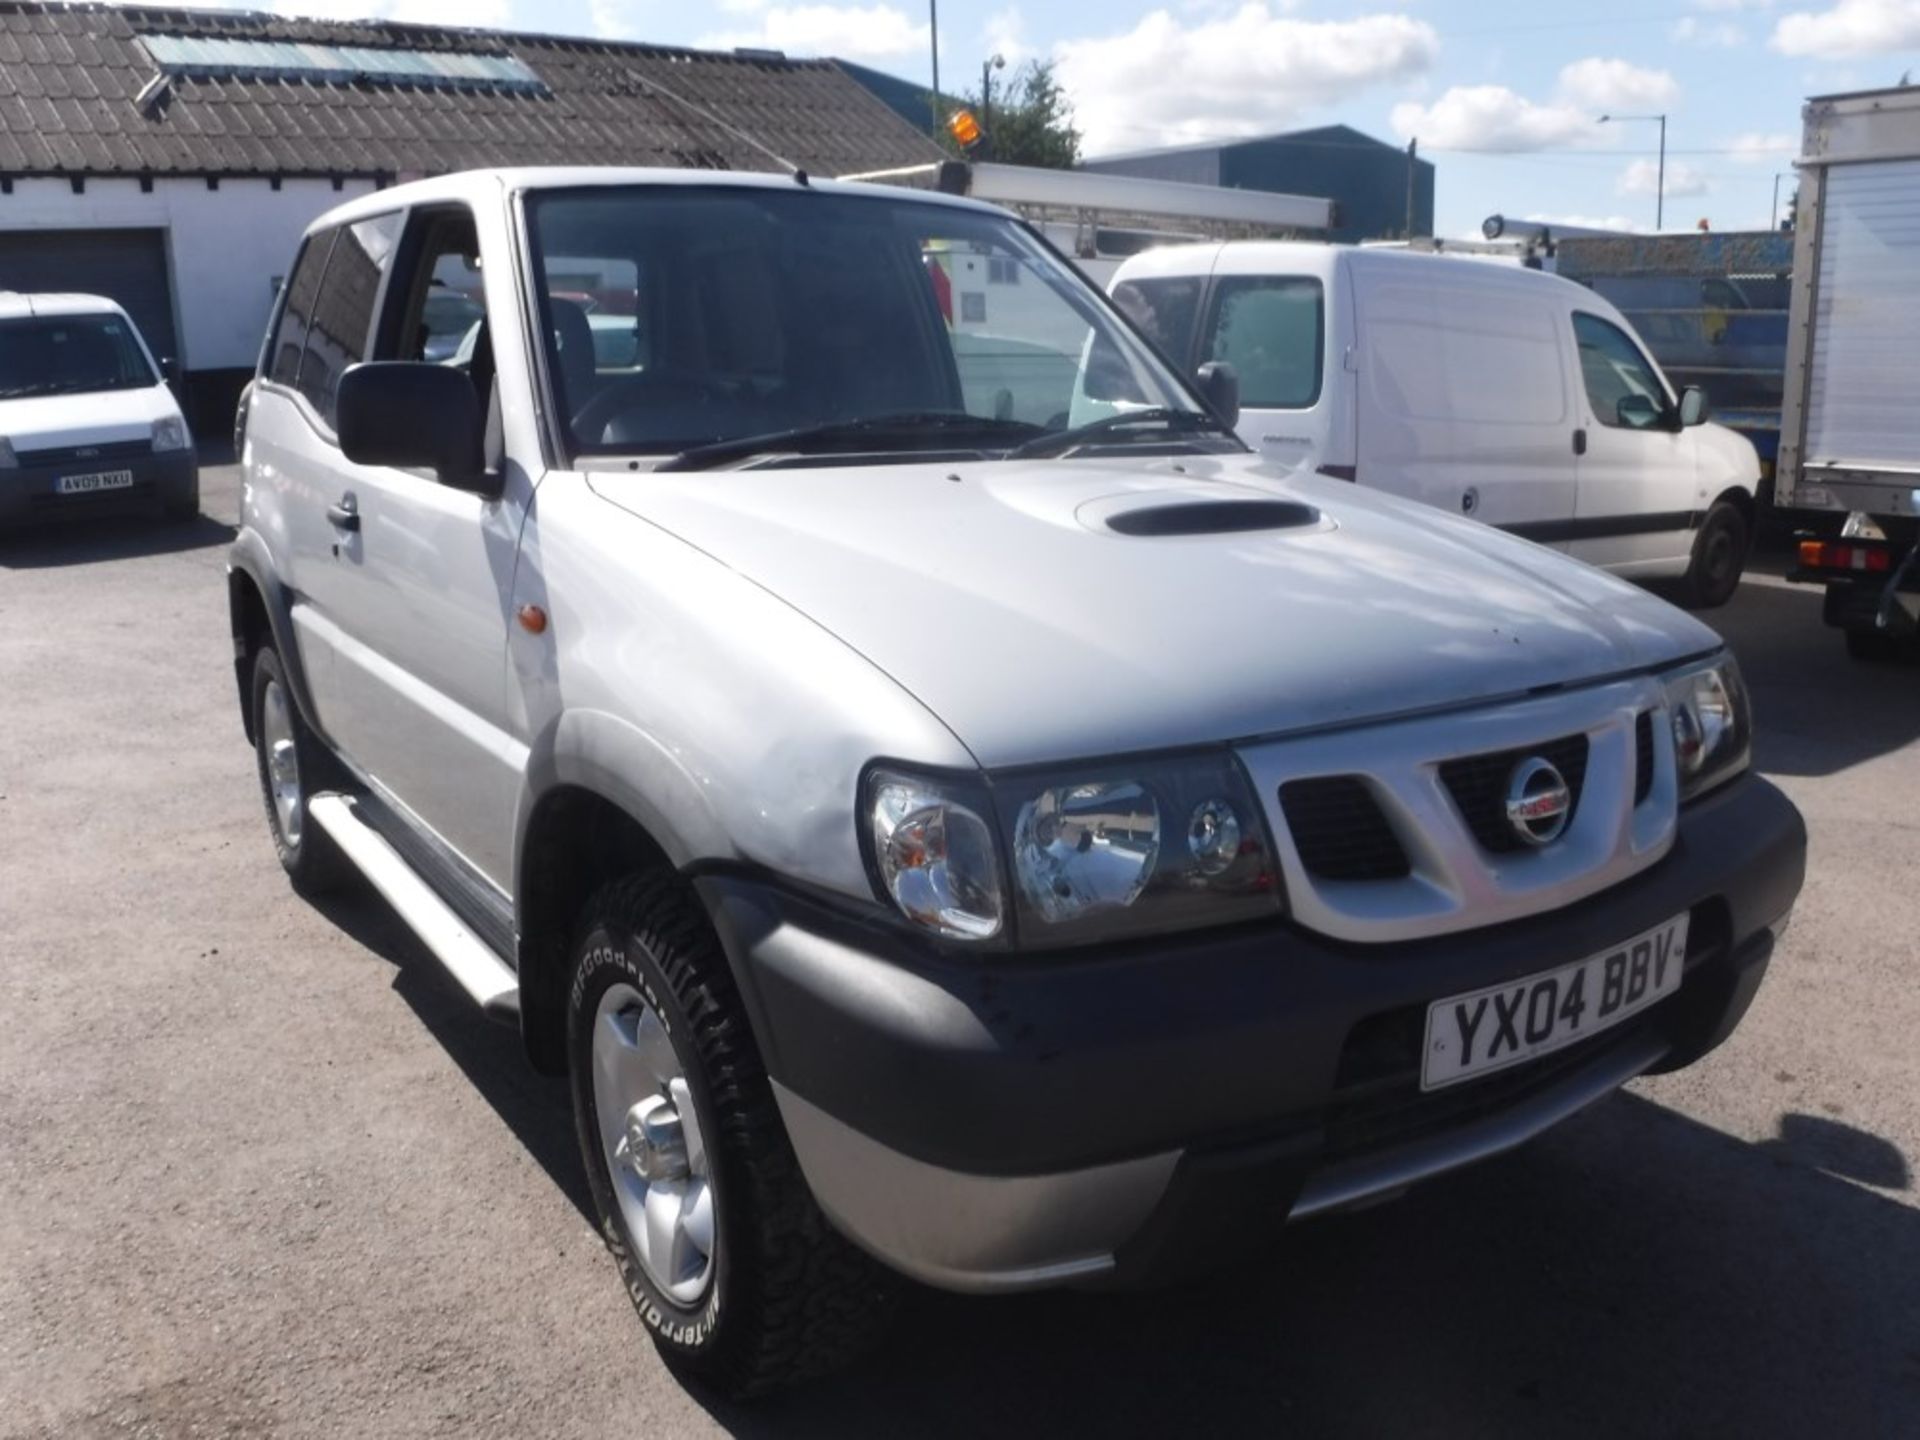 04 reg NISSAN TERRANO, 1ST REG 03/04, TEST 05/16, 140449M WARRANTED, V5 HERE, 3 FORMER KEEPERS [NO